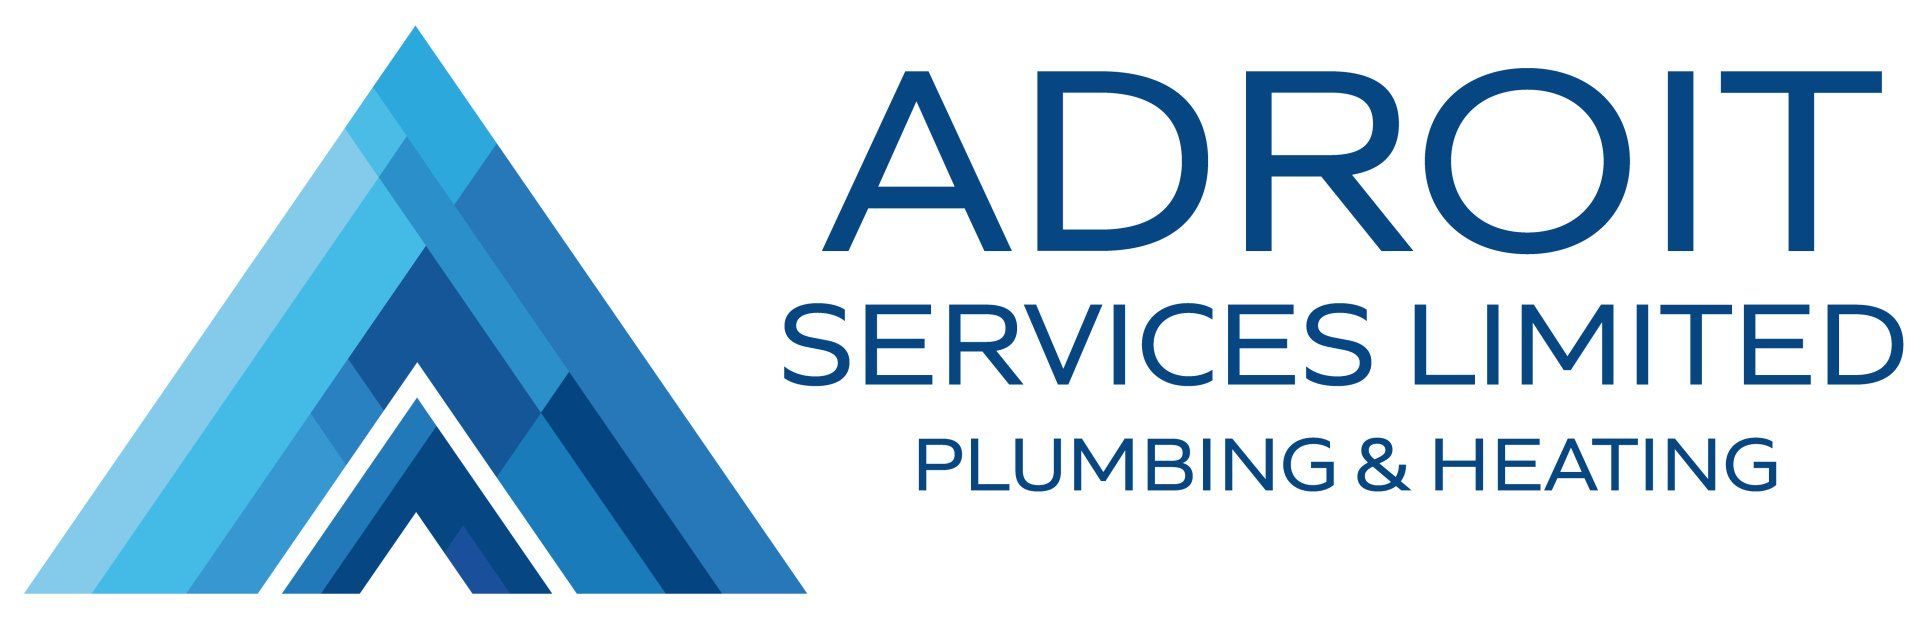 Adroit Services Limited plumbing & heating logo